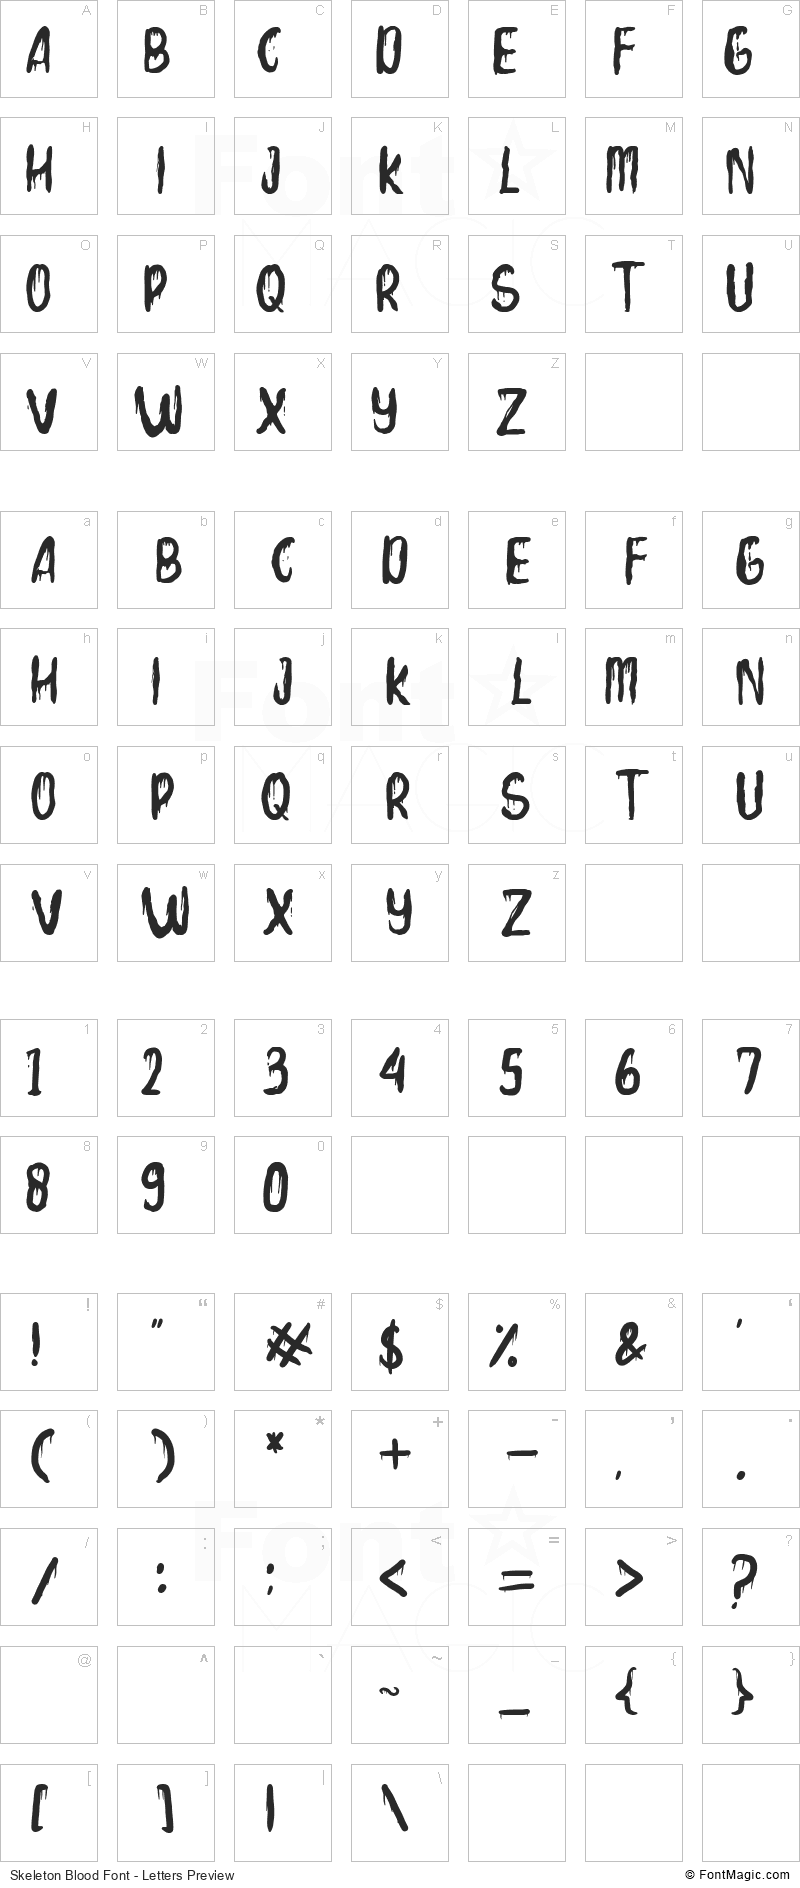 Skeleton Blood Font - All Latters Preview Chart